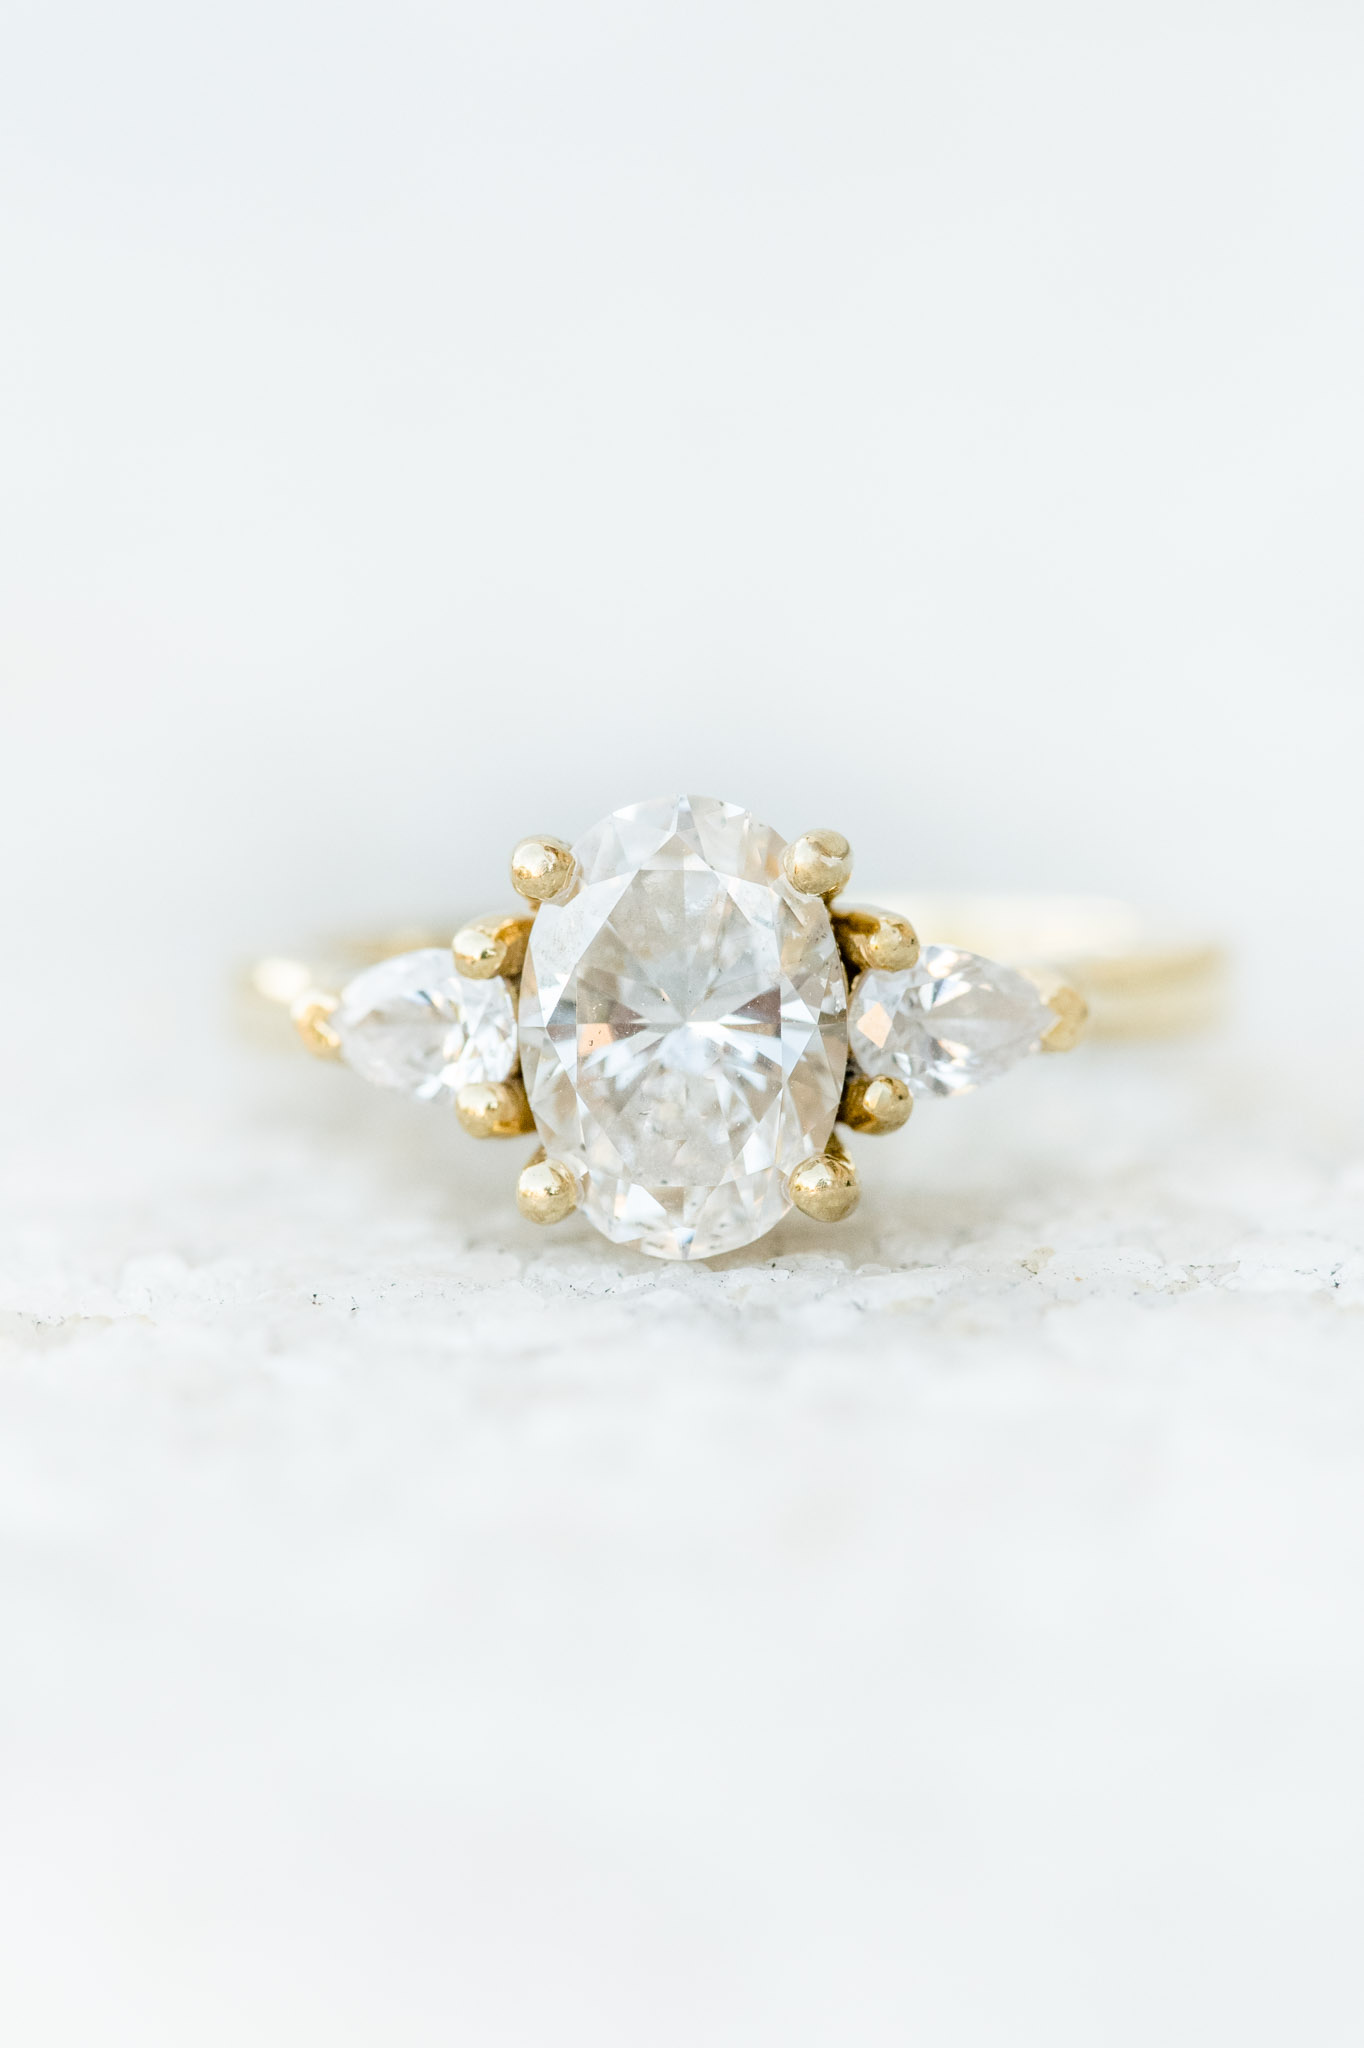 Oval engagement ring sits on stone.